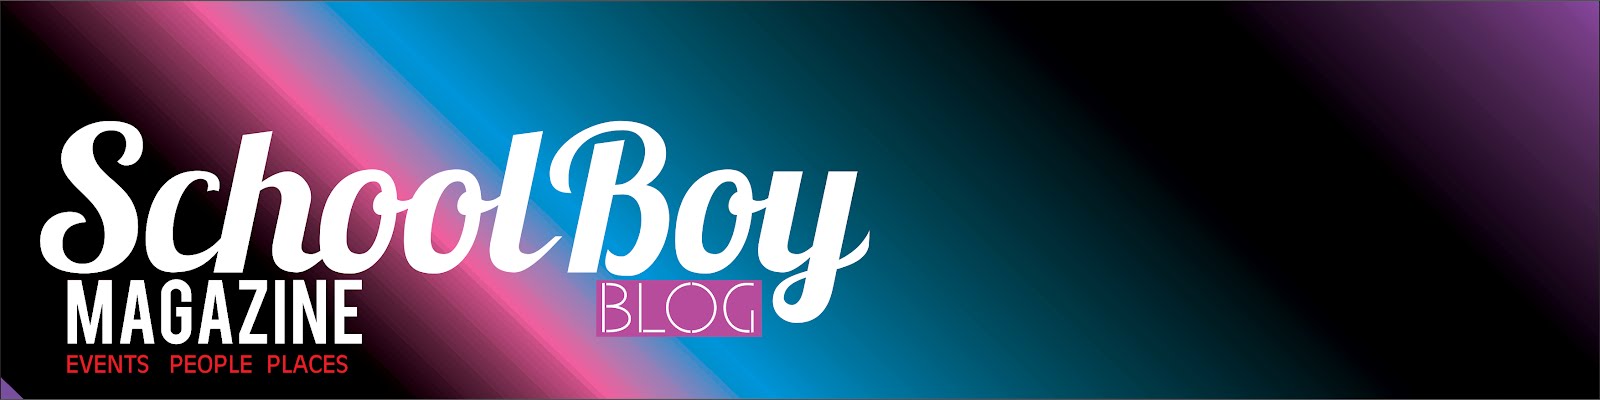 Welcome to SchoolBoy Magazine's Blog